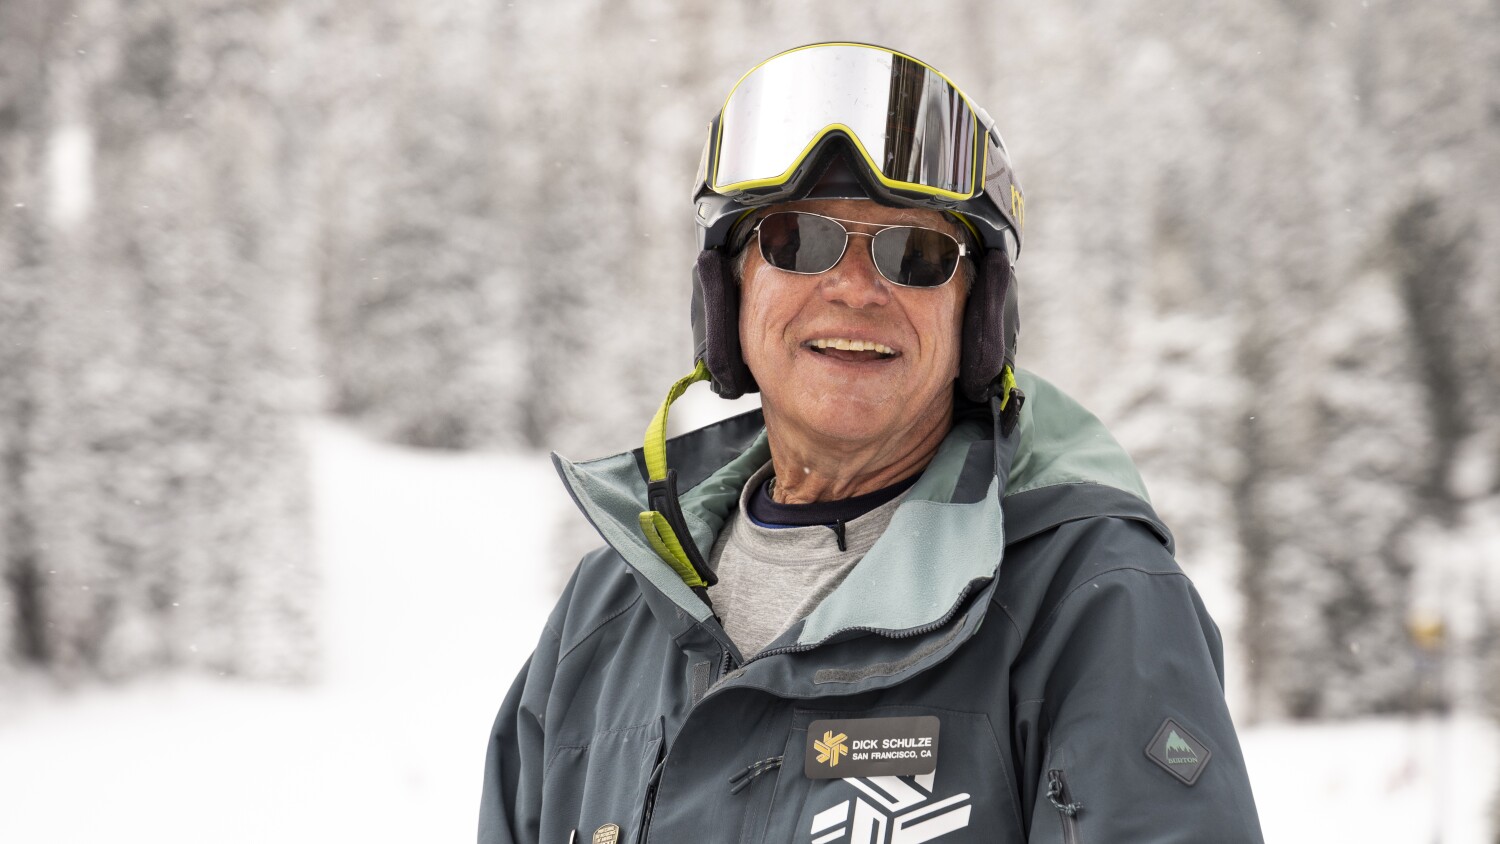 He's America's oldest competitive snowboarder at 76. Just try keeping up